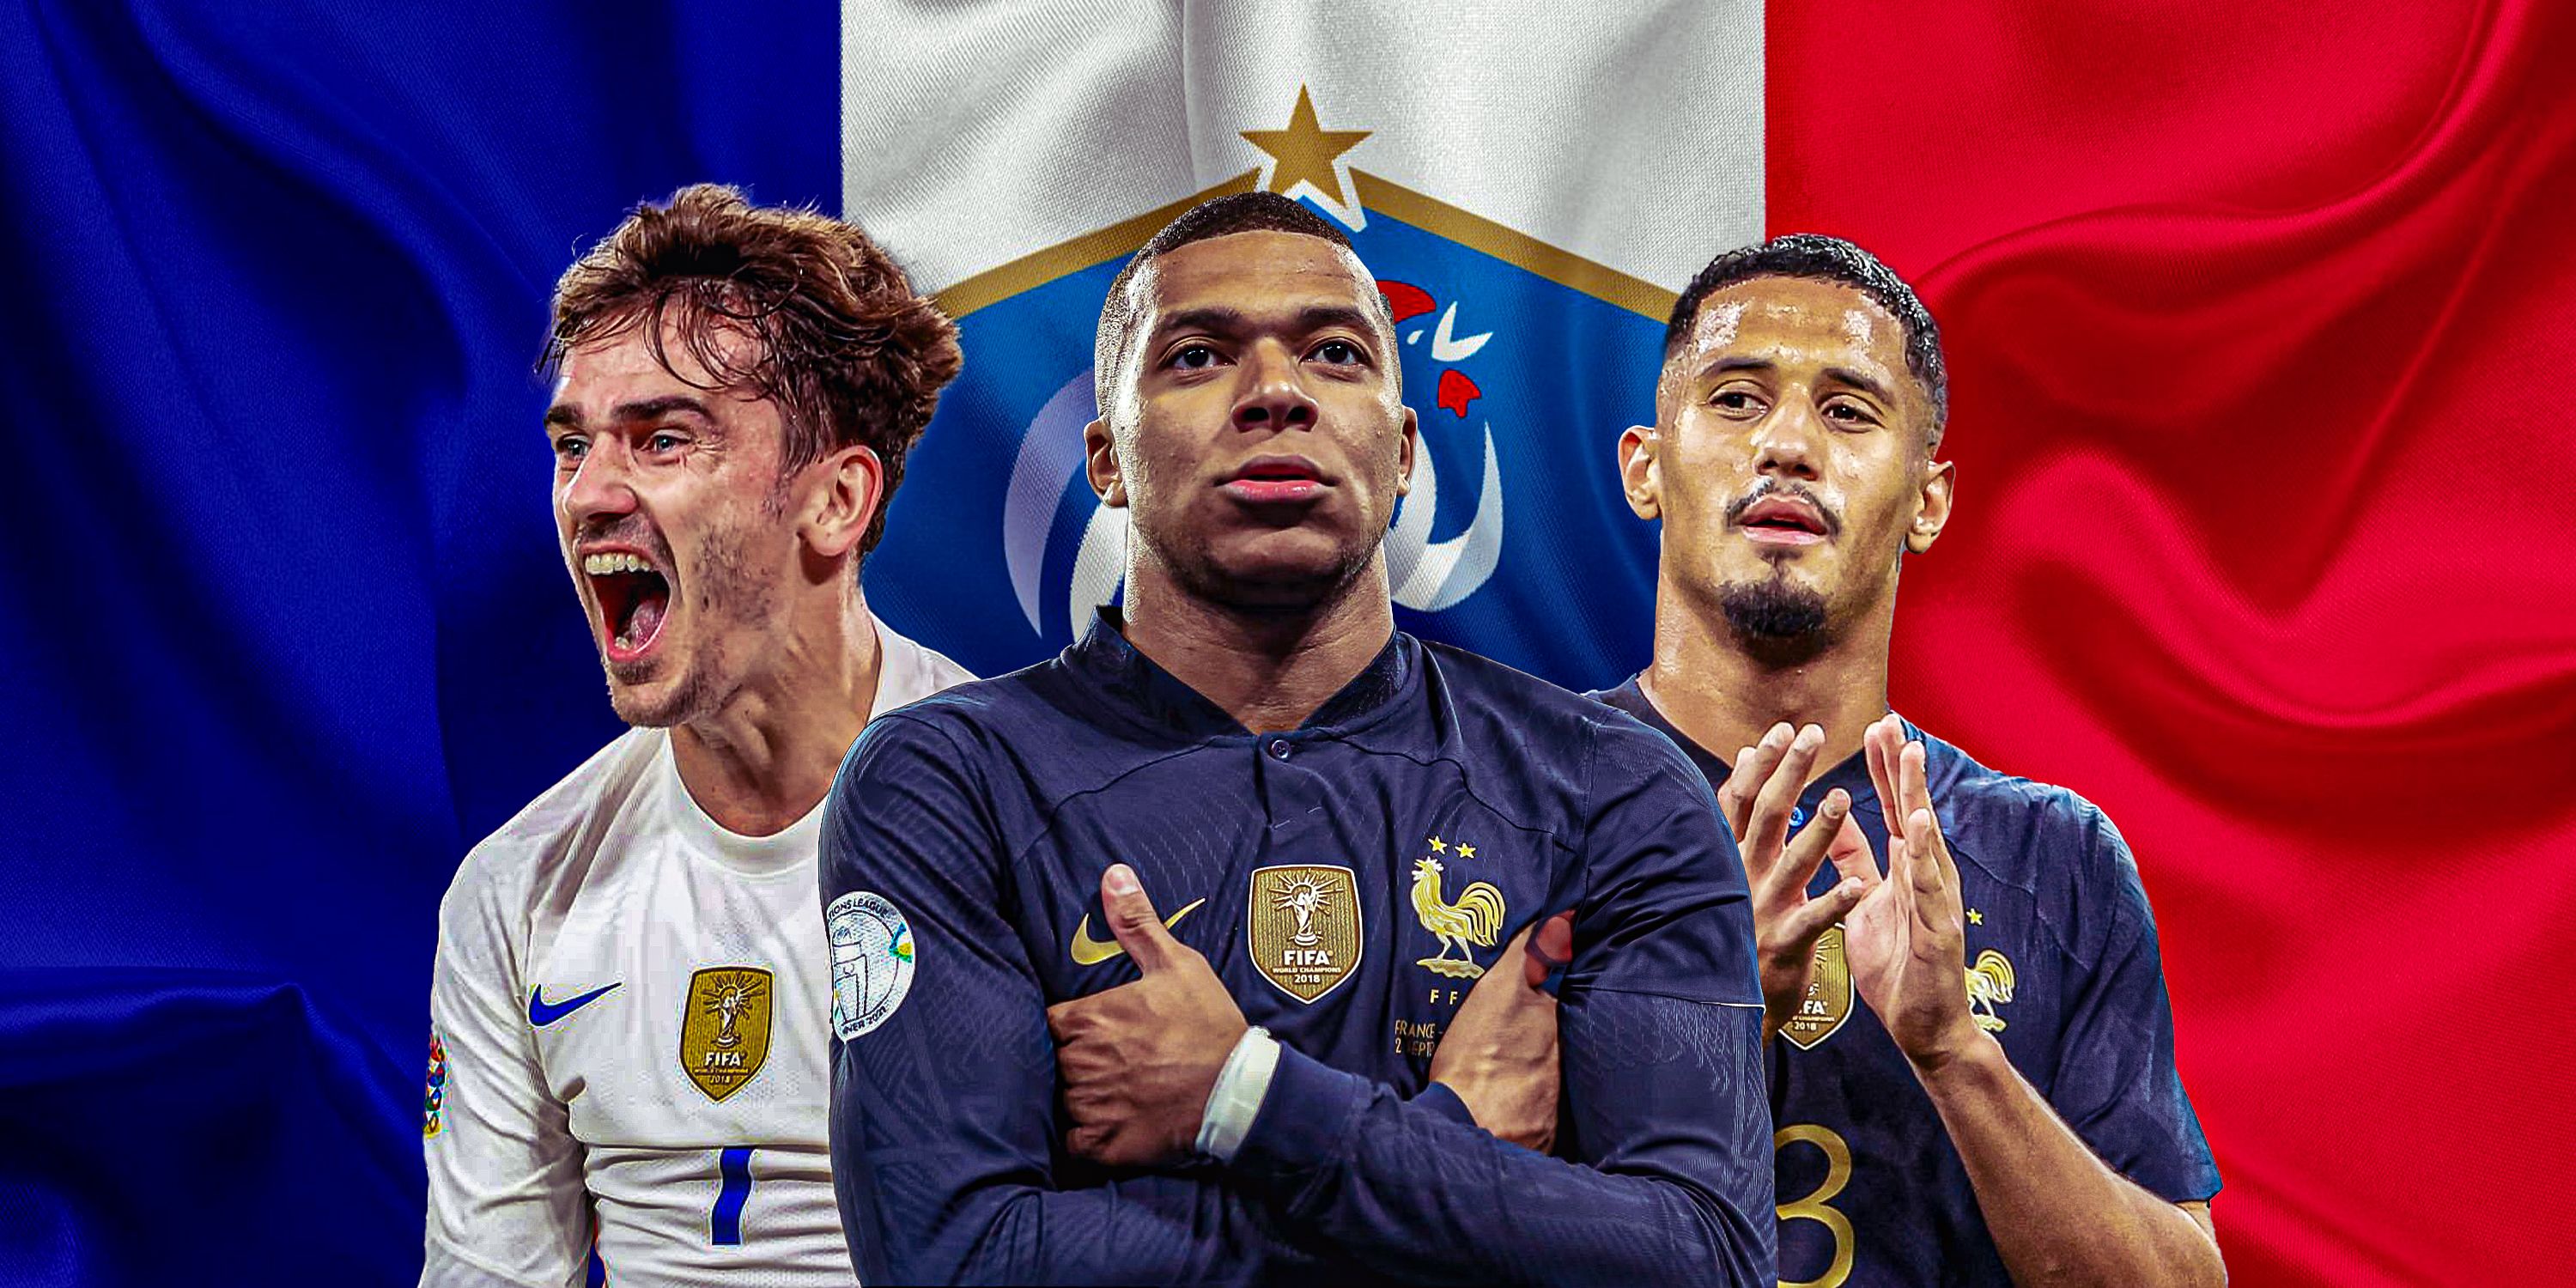 Kylian Mbappe in the middle with William Saliba and Antoine Griezmann in France kit